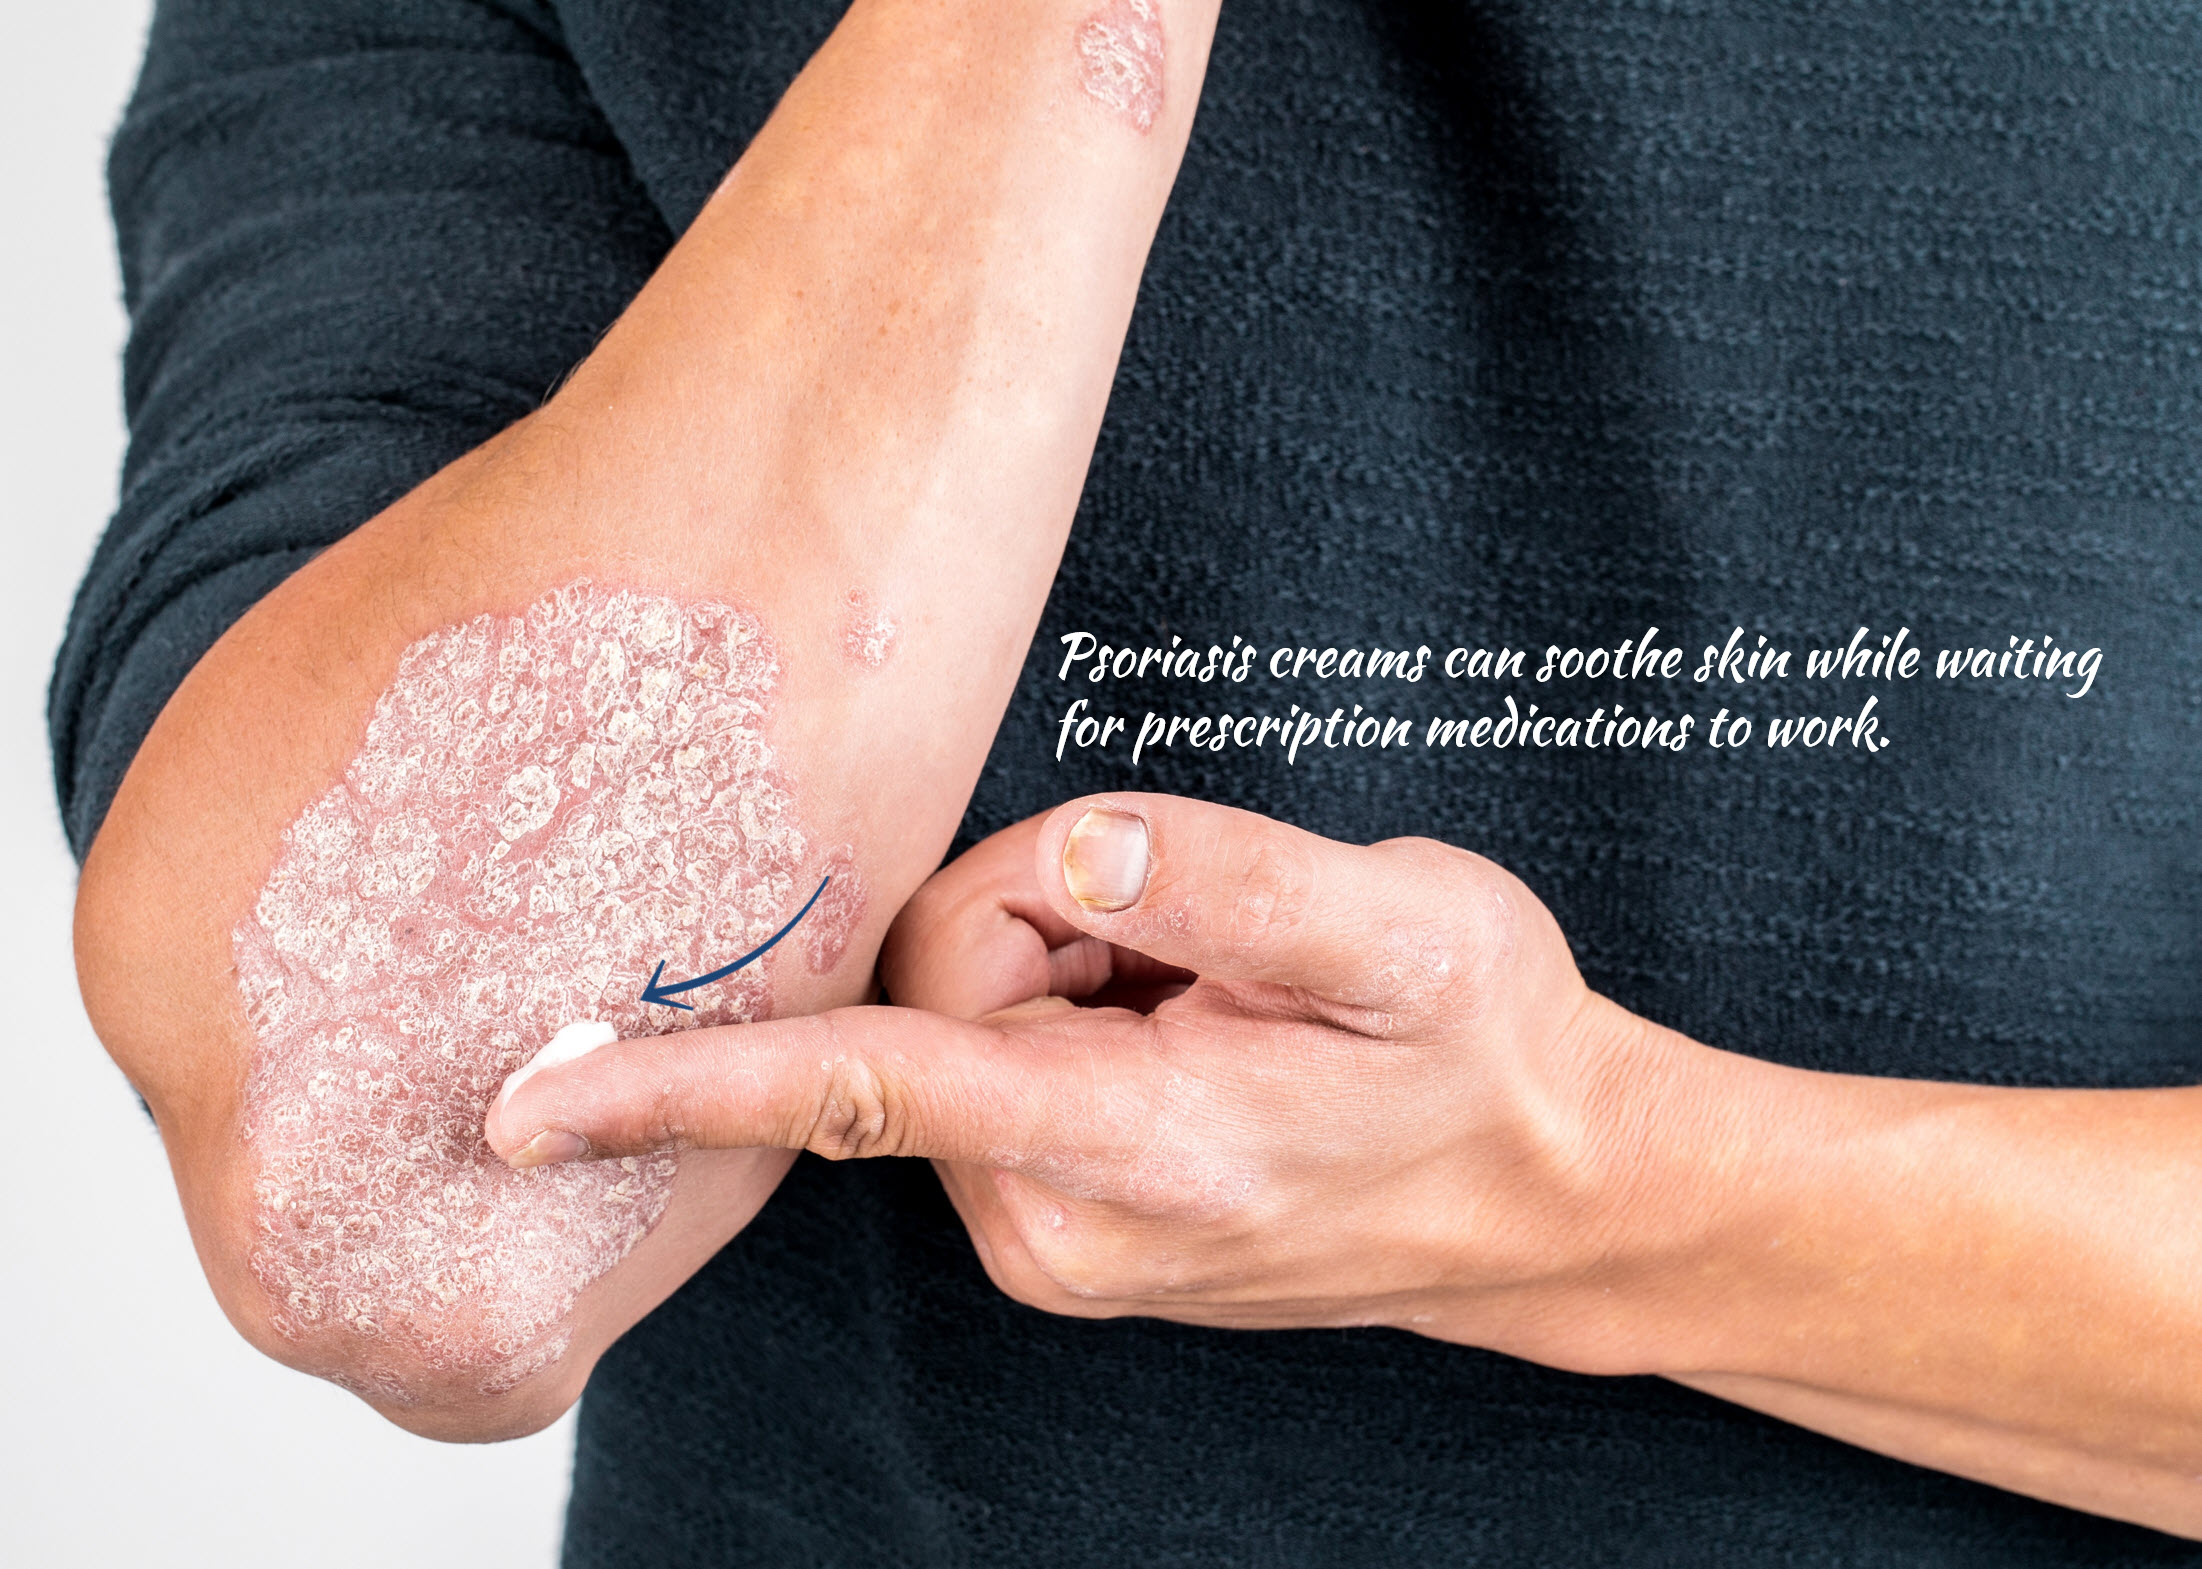 Psoriasis creams can soothe skin while waiting for prescription medications to work.